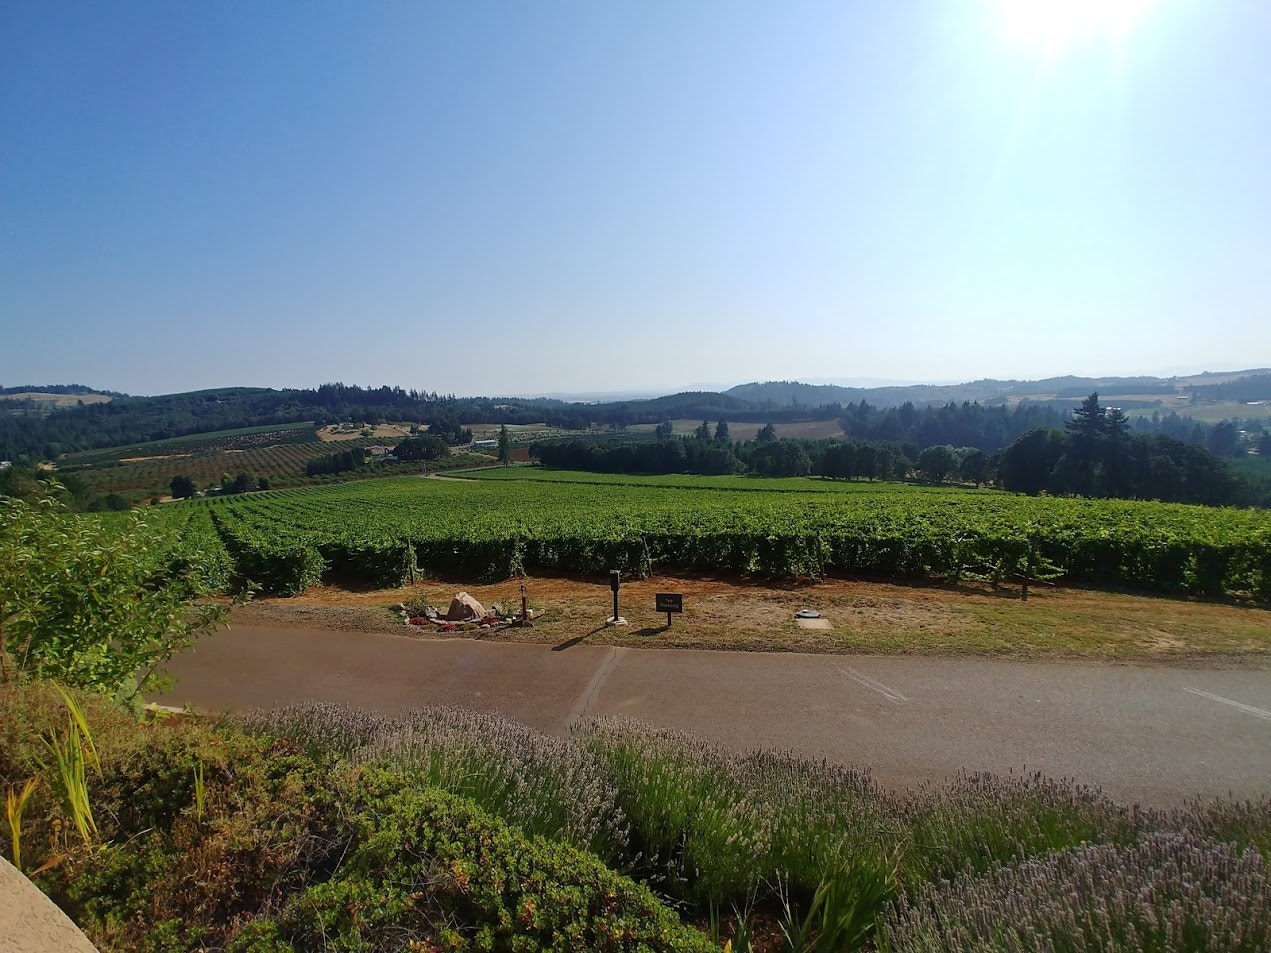 The view from Willamette Valley Vineyards tasting room is one of rolling hills covered in green grapevines. Beyond the vines is a windbreak of various types of trees, and beyond that, blue hills. In the foreground is a brown sidewalk and dusky lavender bushes